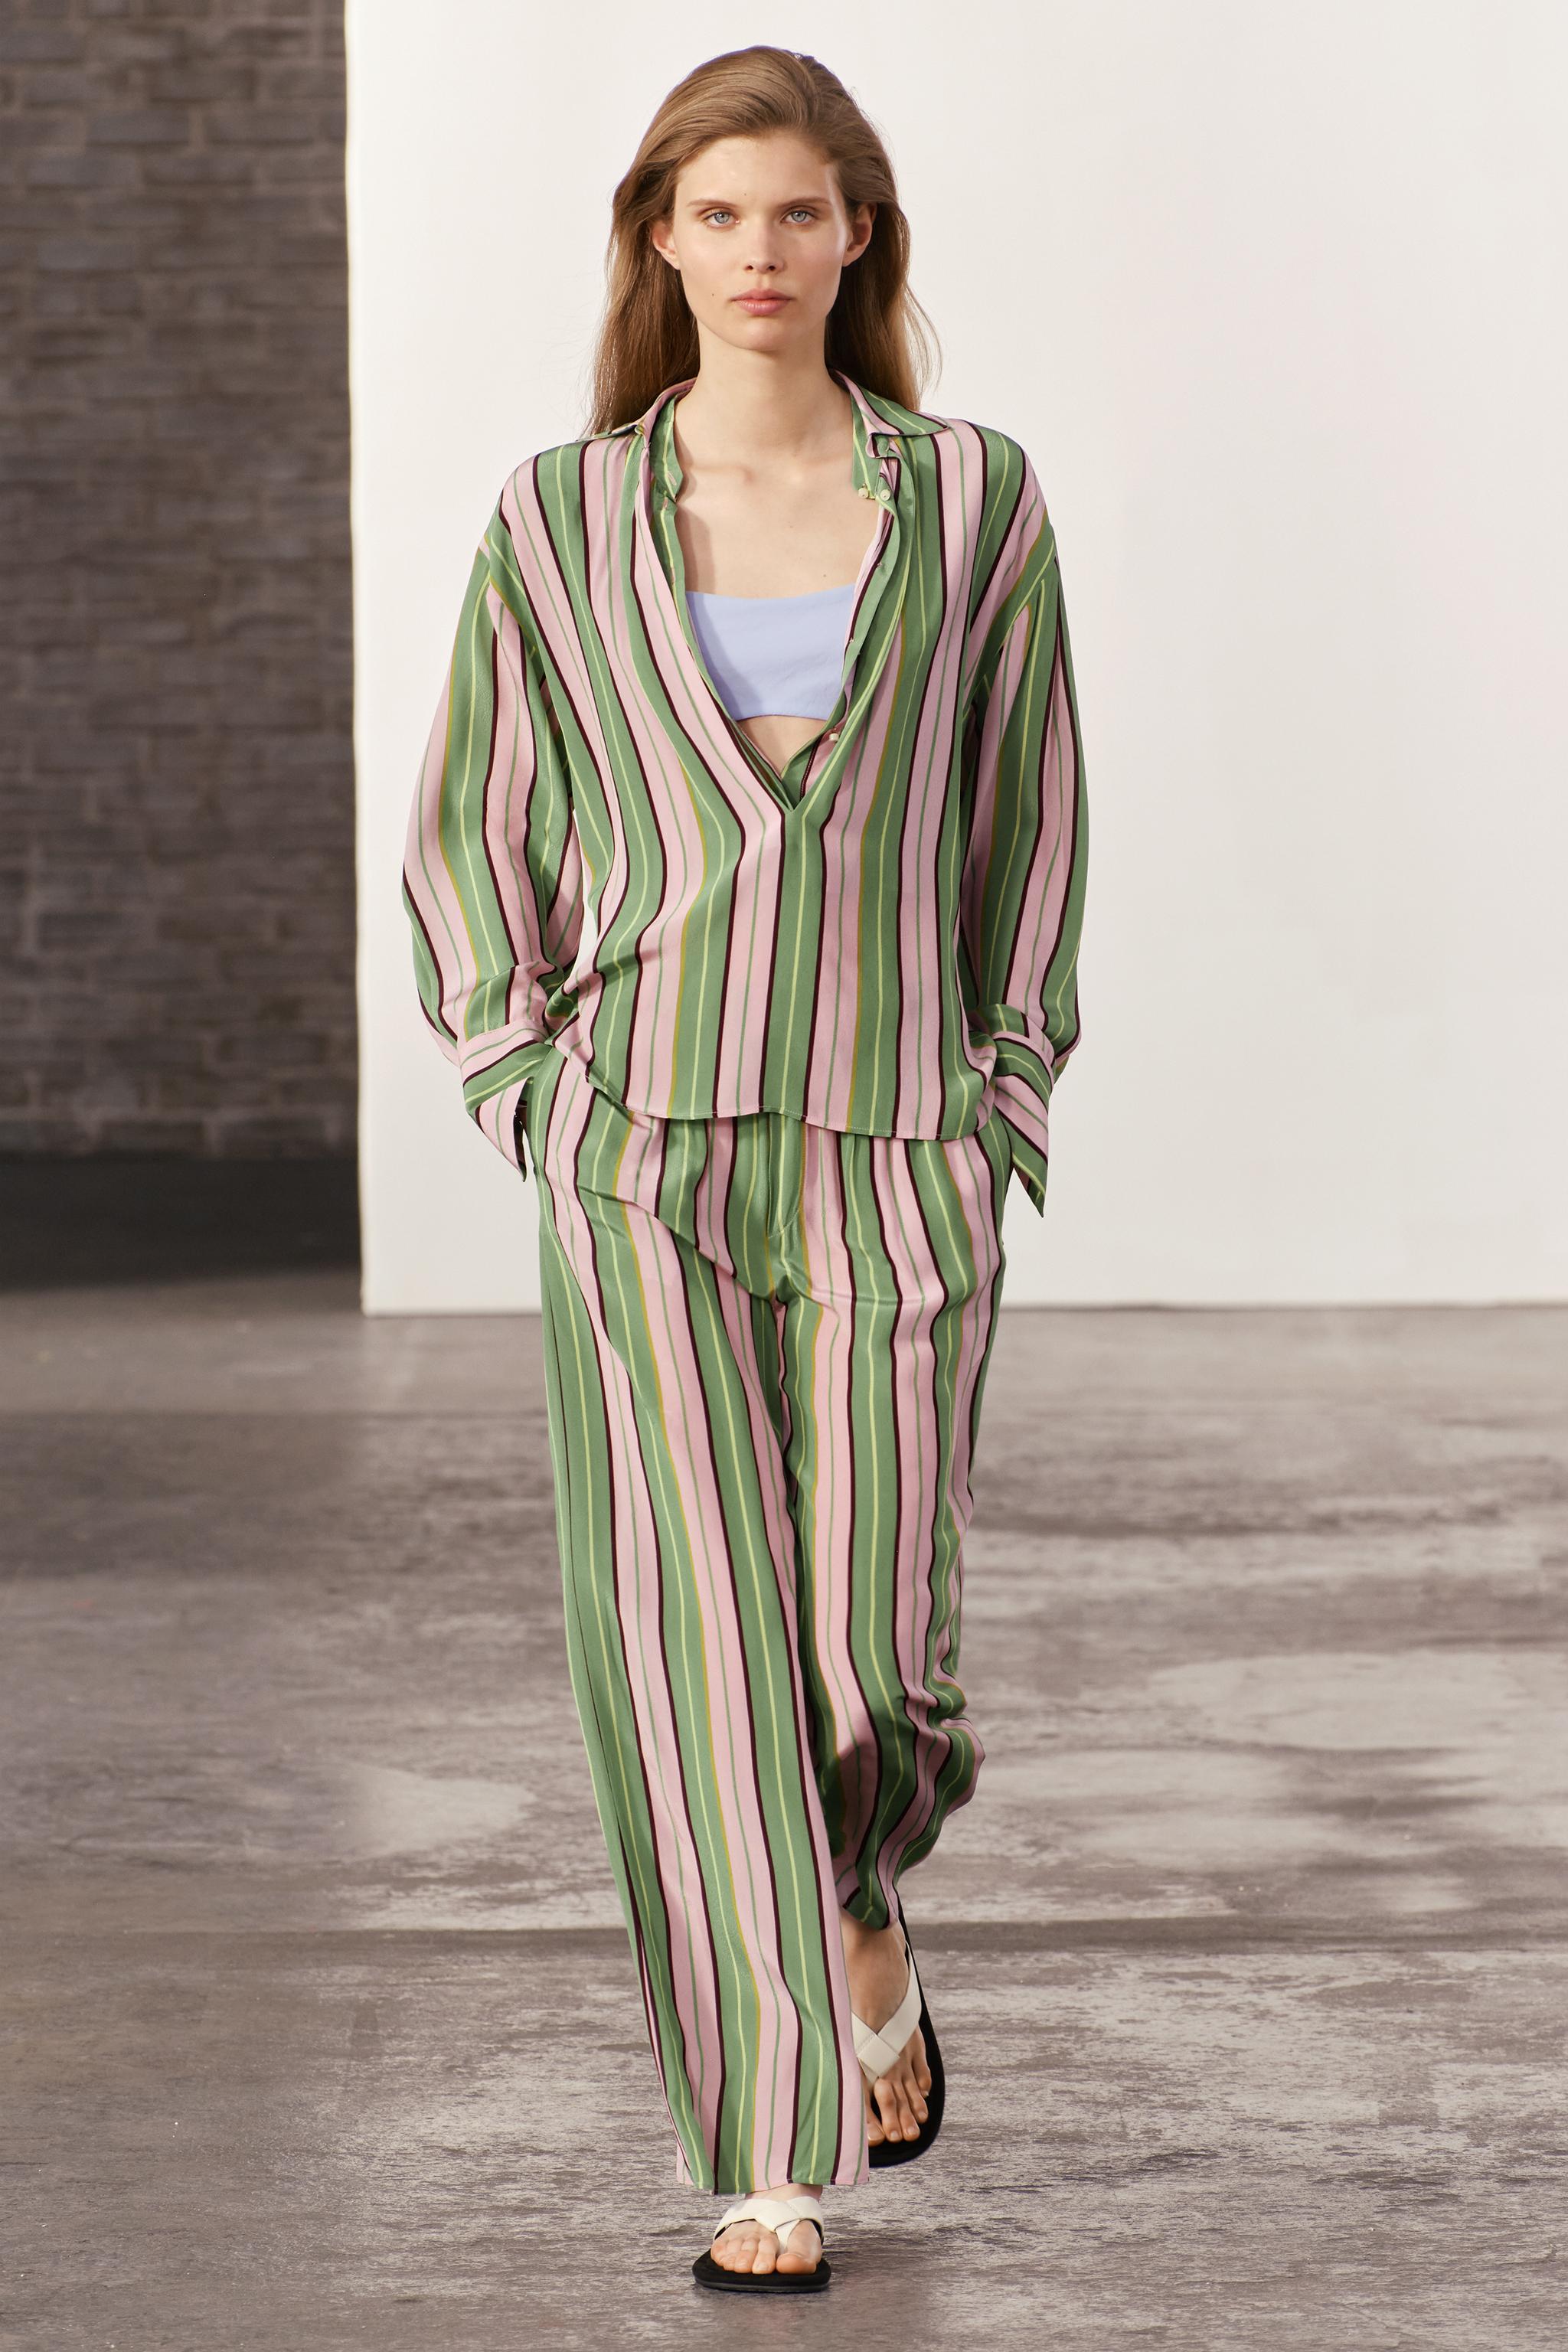 Is The Pajama Look A Good Fashion Trend?-Pajamas That Can Be Worn Out In  Public Rather Than In Bed.